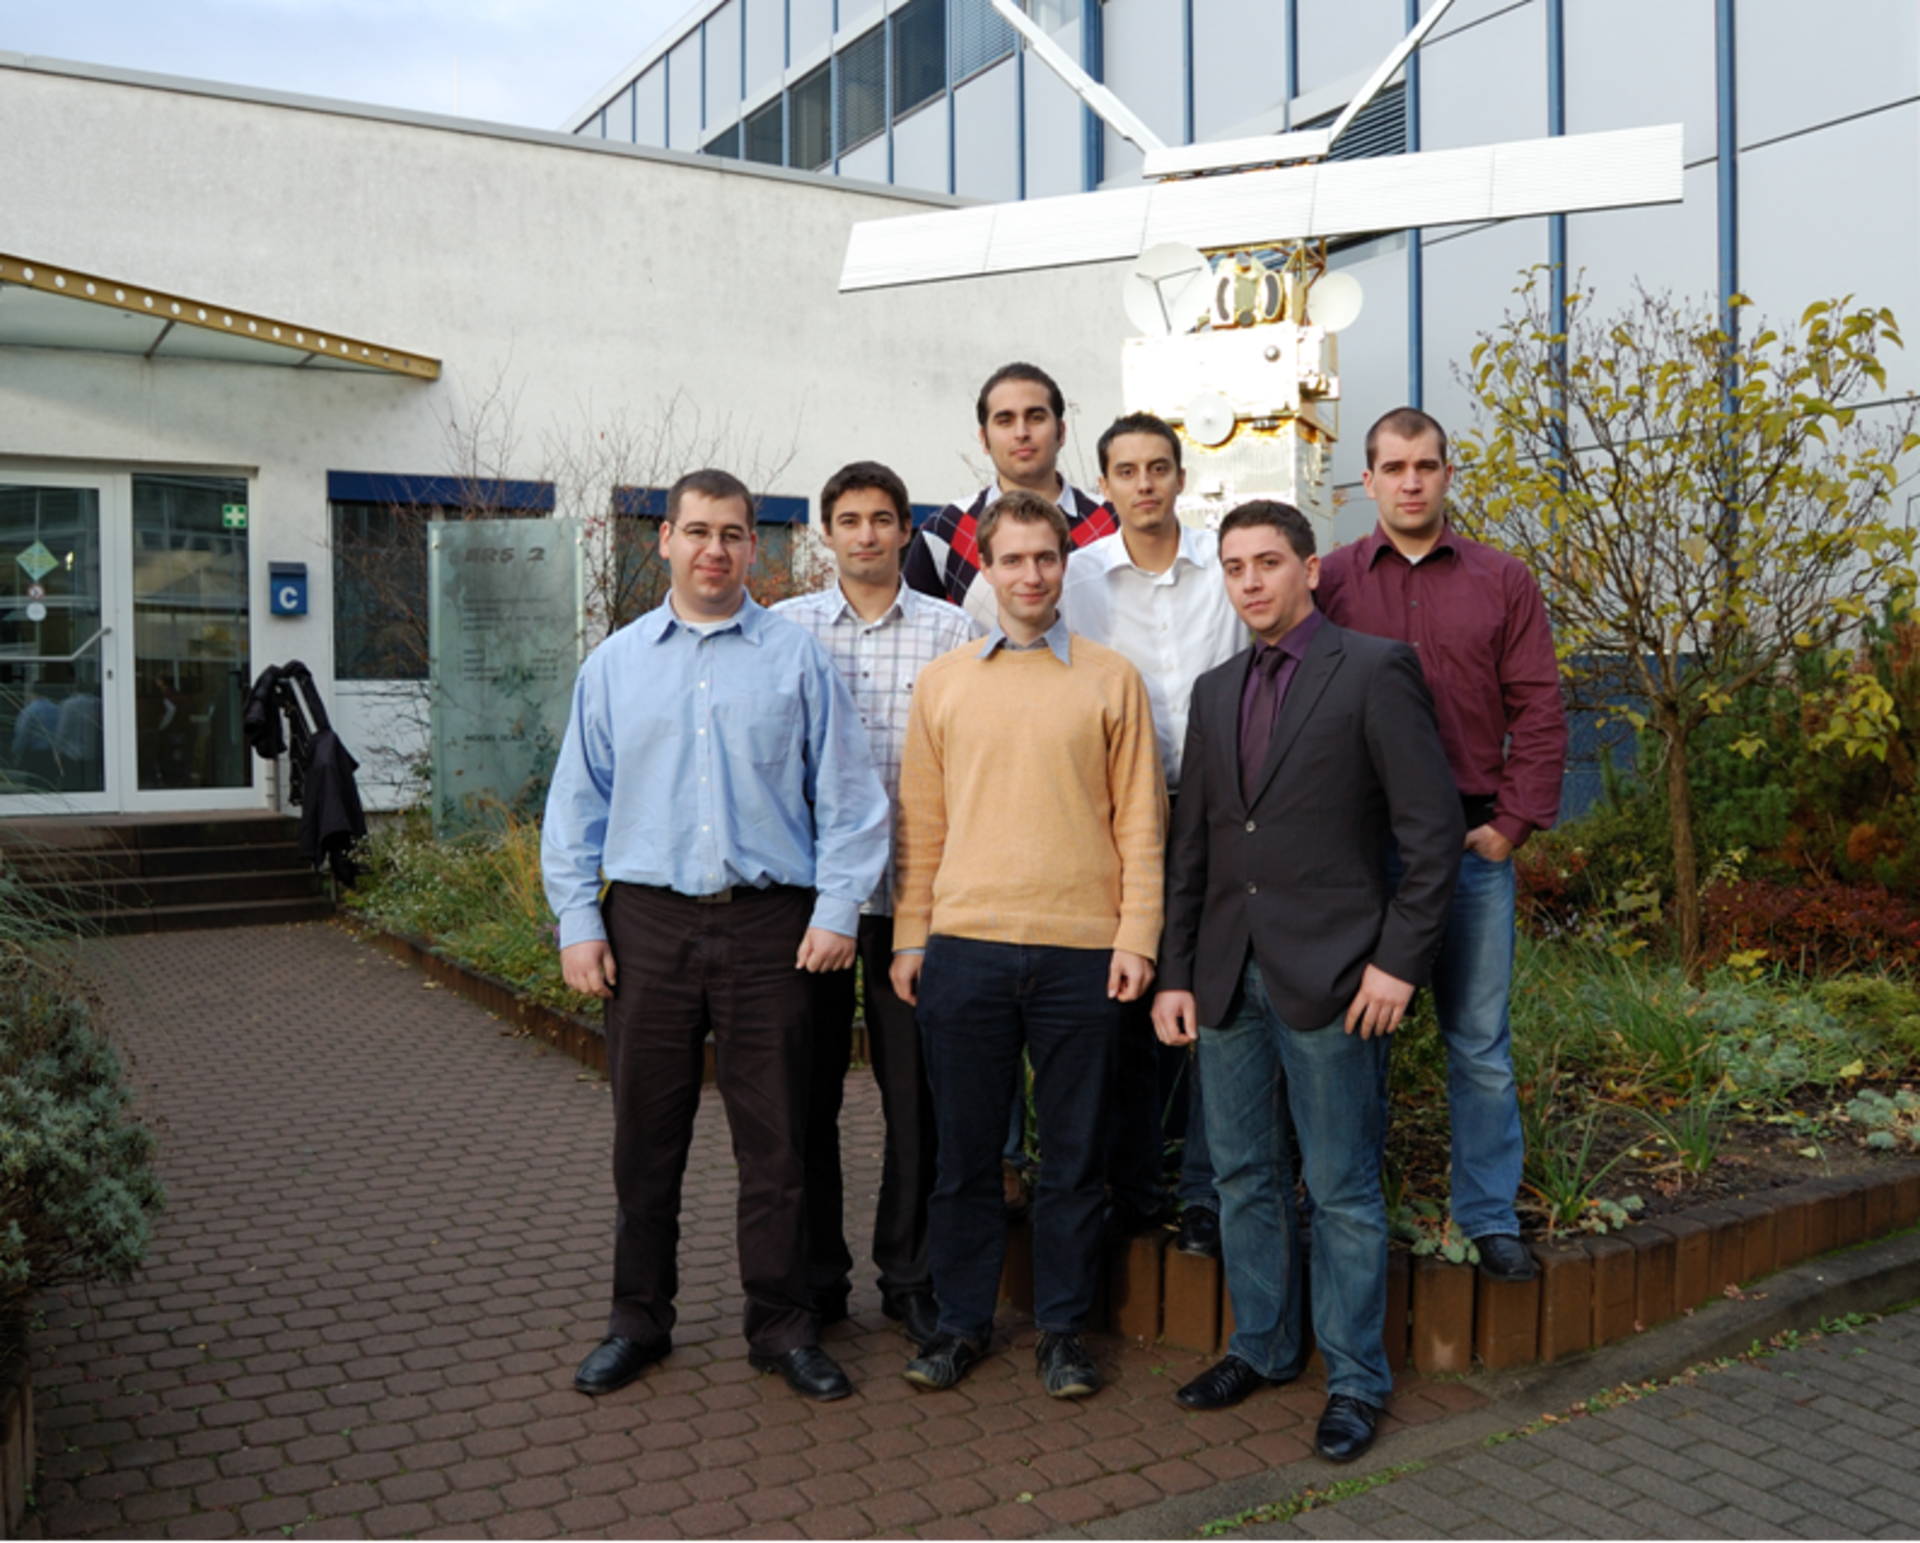 Verimatic’s team with founder Matthias Siegel (front row, at the right)